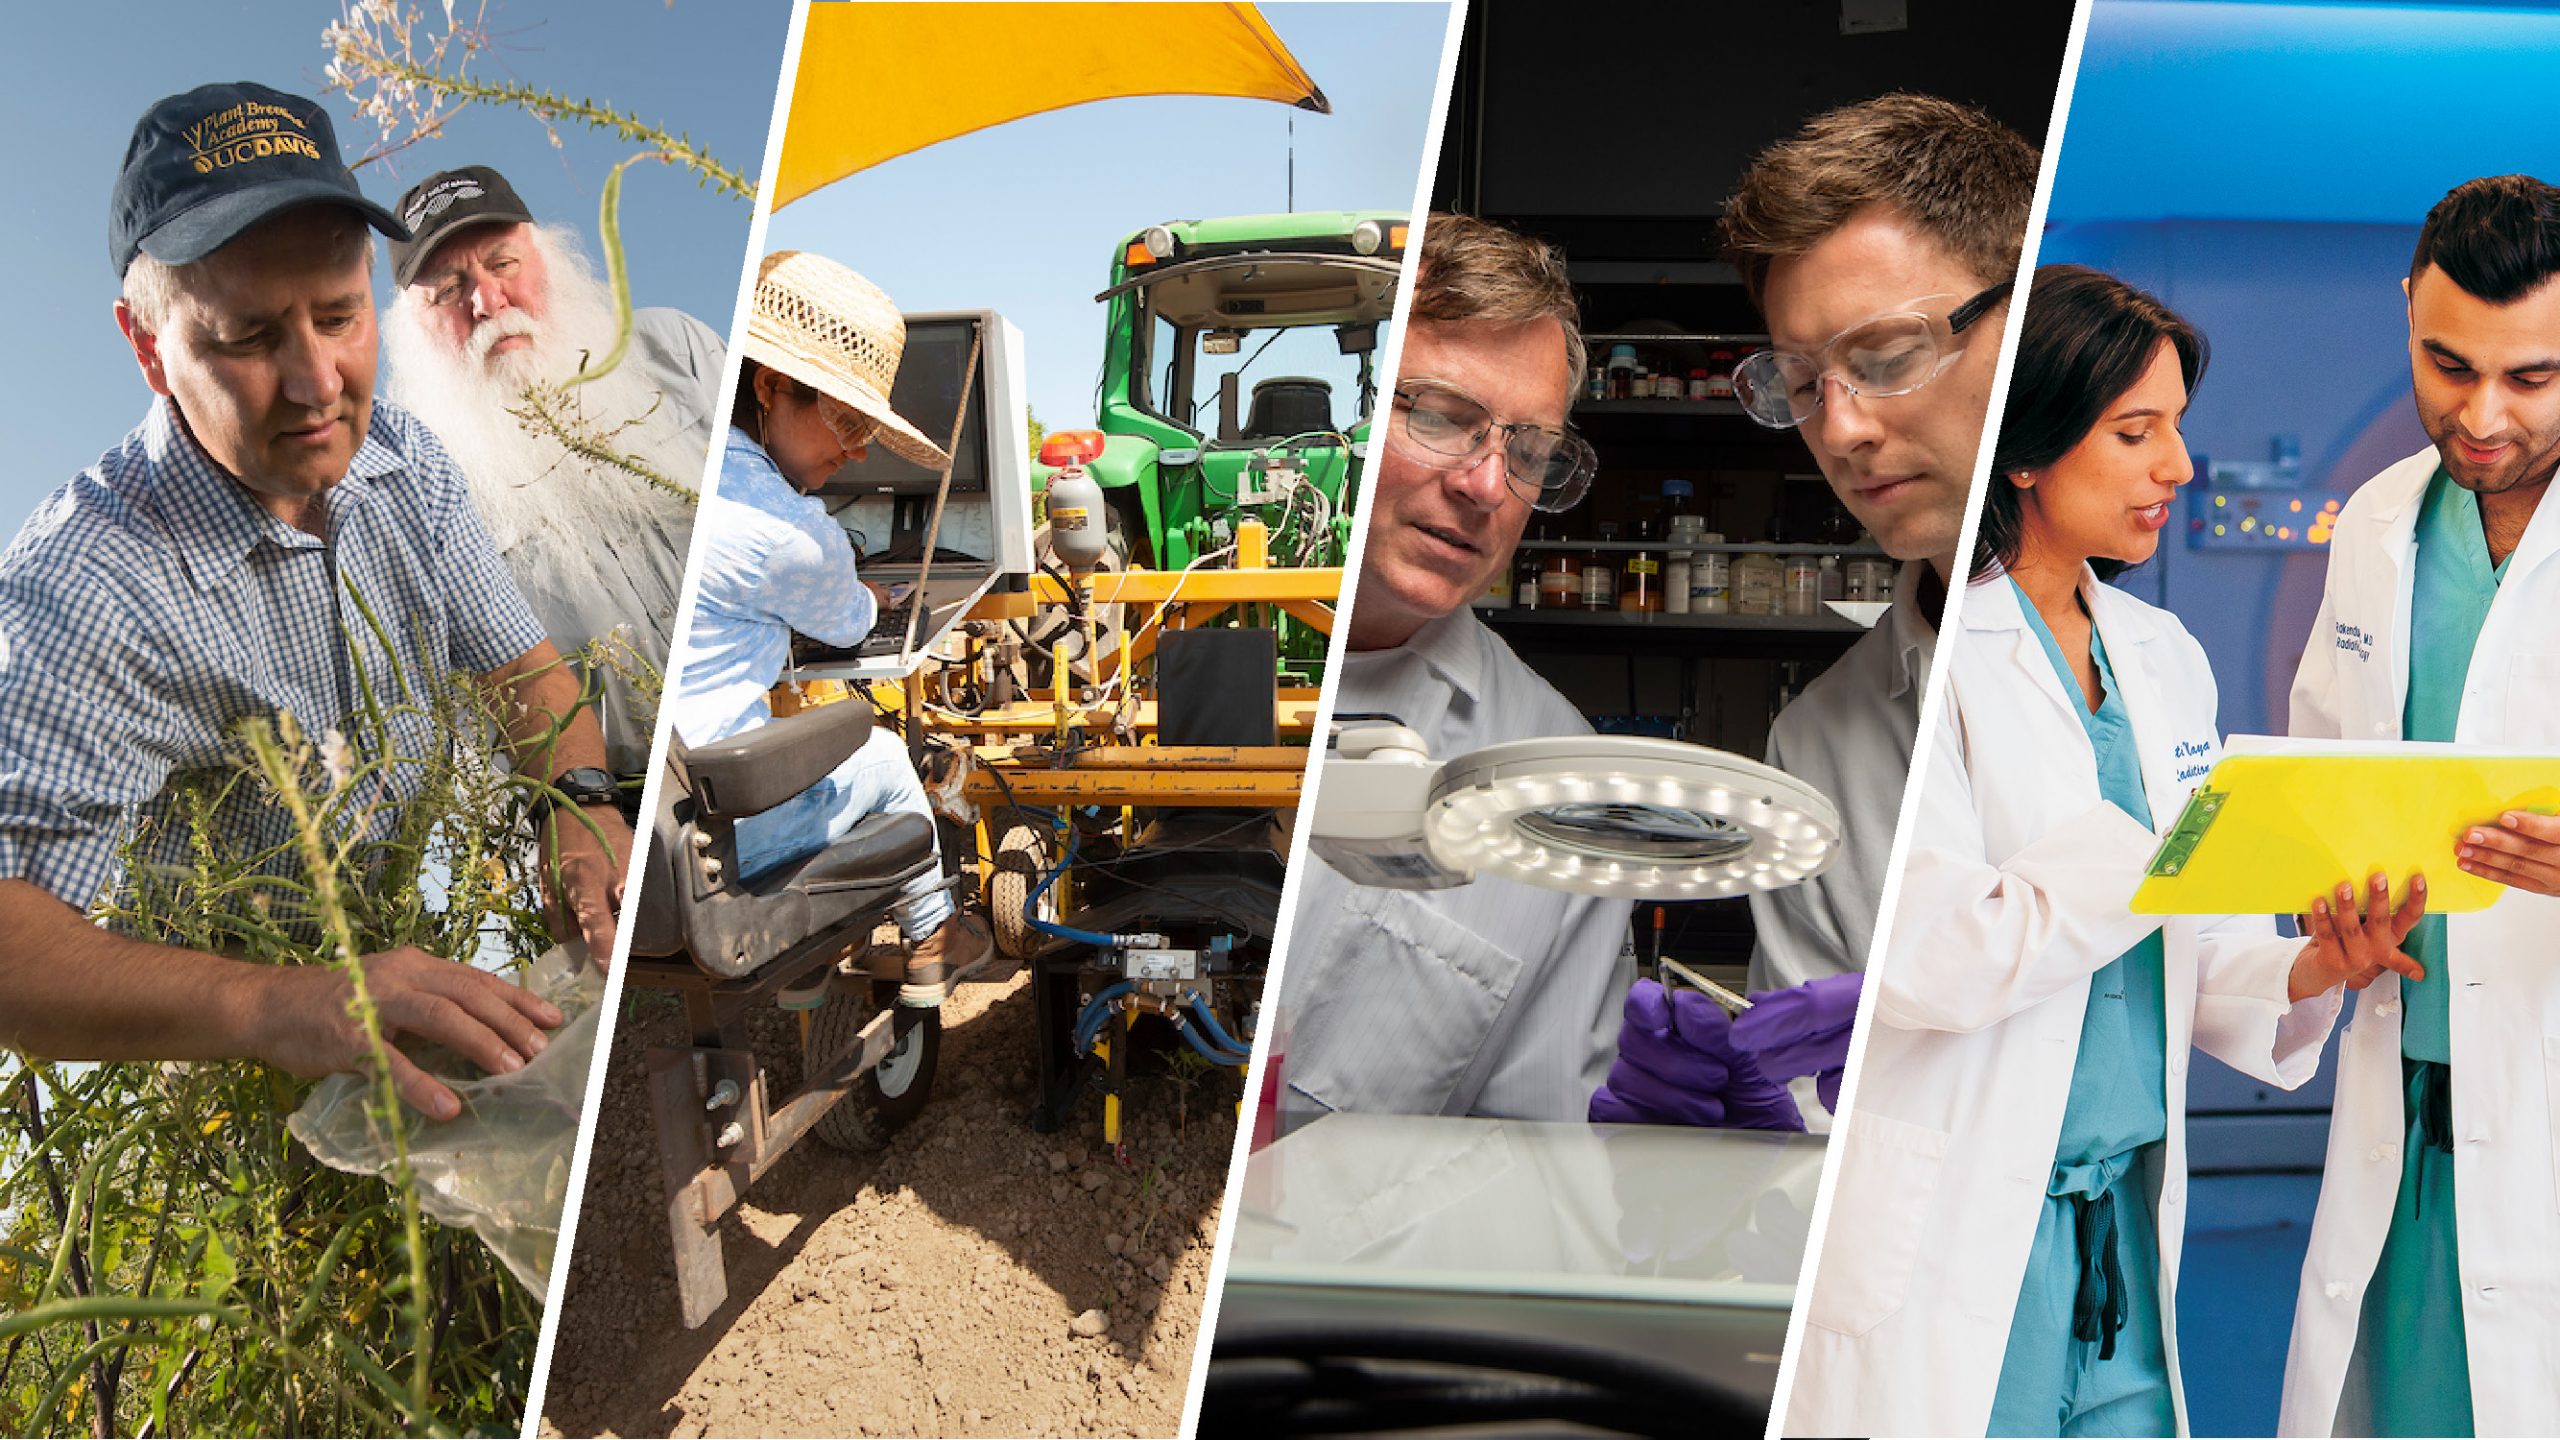 compilation of four photos depictign research: a scientist looking at plants in a field, a scientist looking at a computer on the back of a piece of farm equipment, two scientists looking through an illuminated magnifying glass, and two doctors looking at a chart